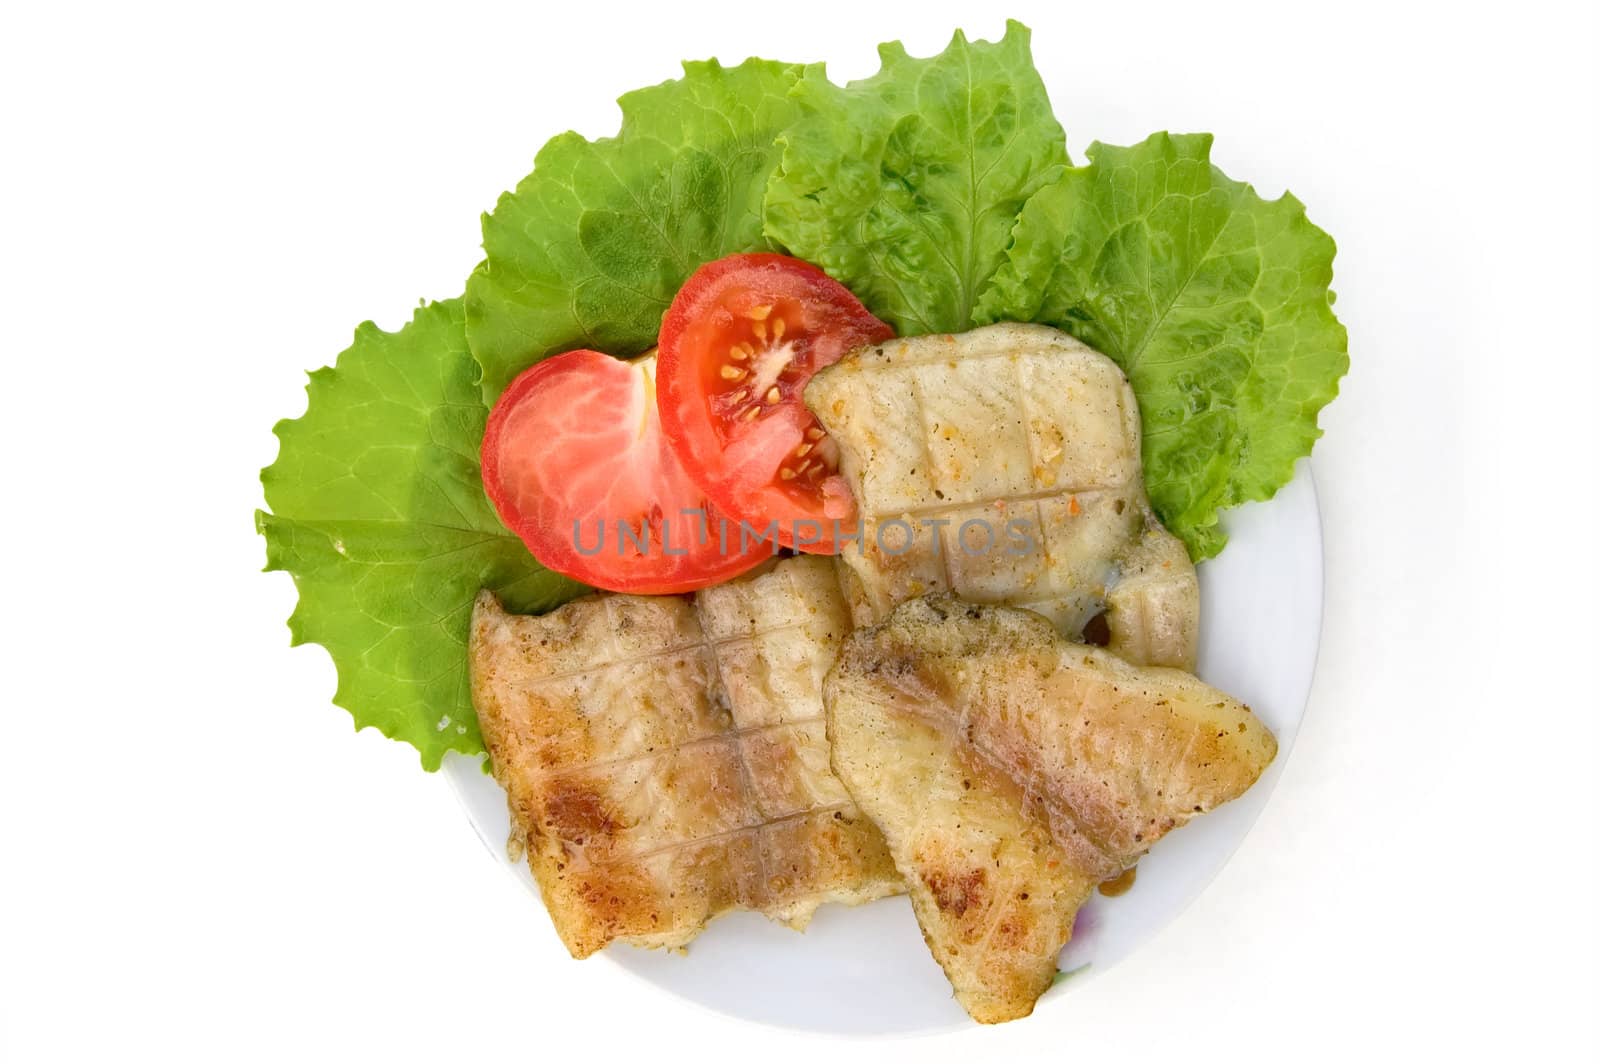 Fish grilled, two slices of red tomatoes, lettuce on a plate isolated on a white background